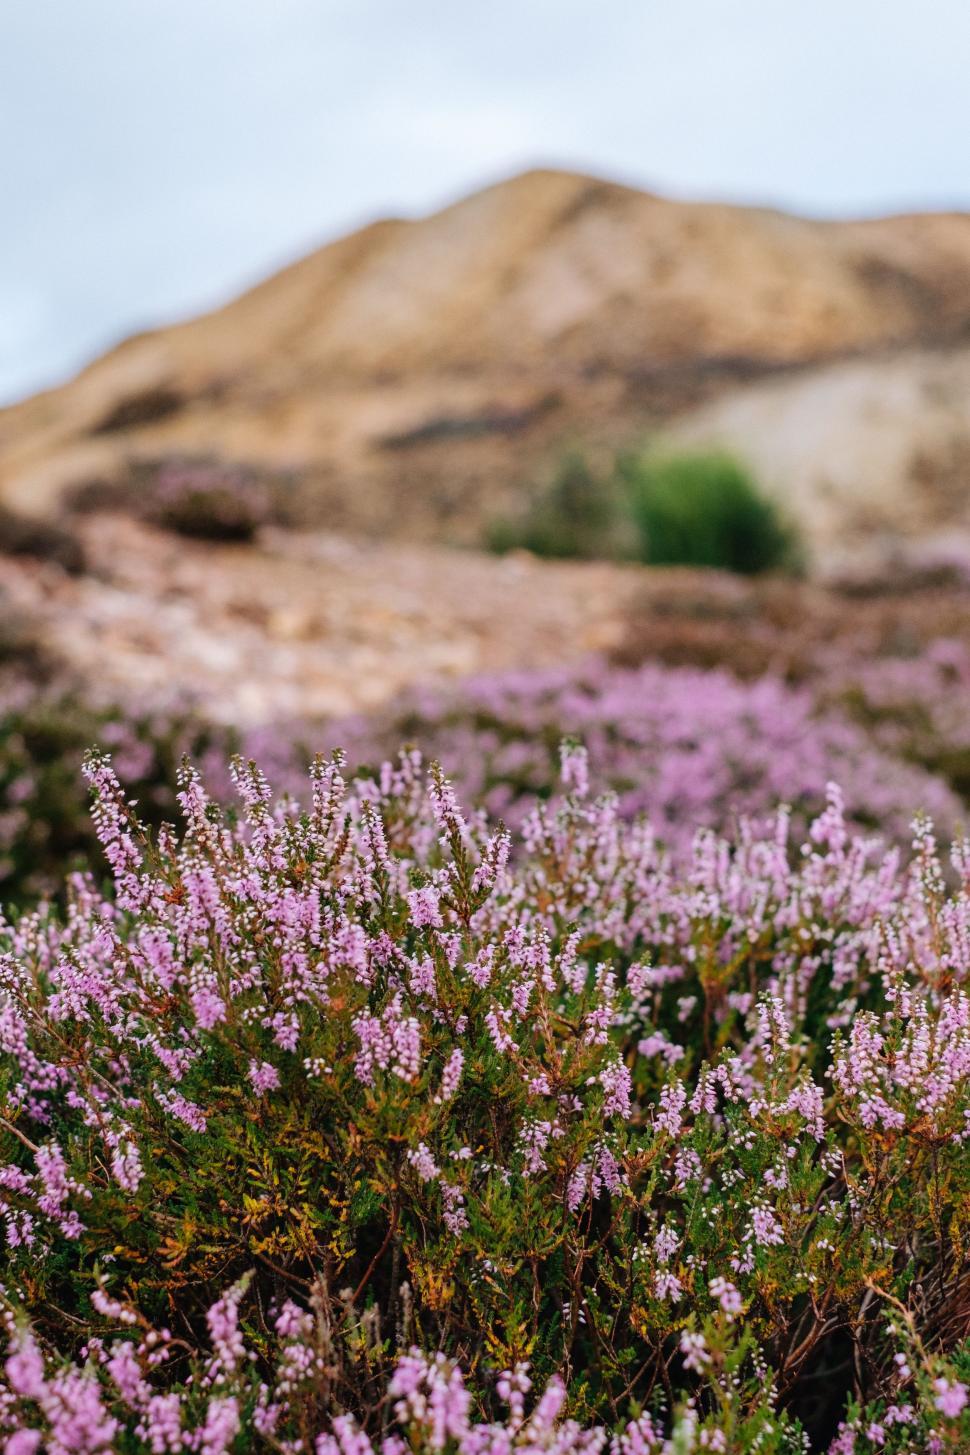 Free Image of Majestic Mountain Over a Field of Purple Flowers 